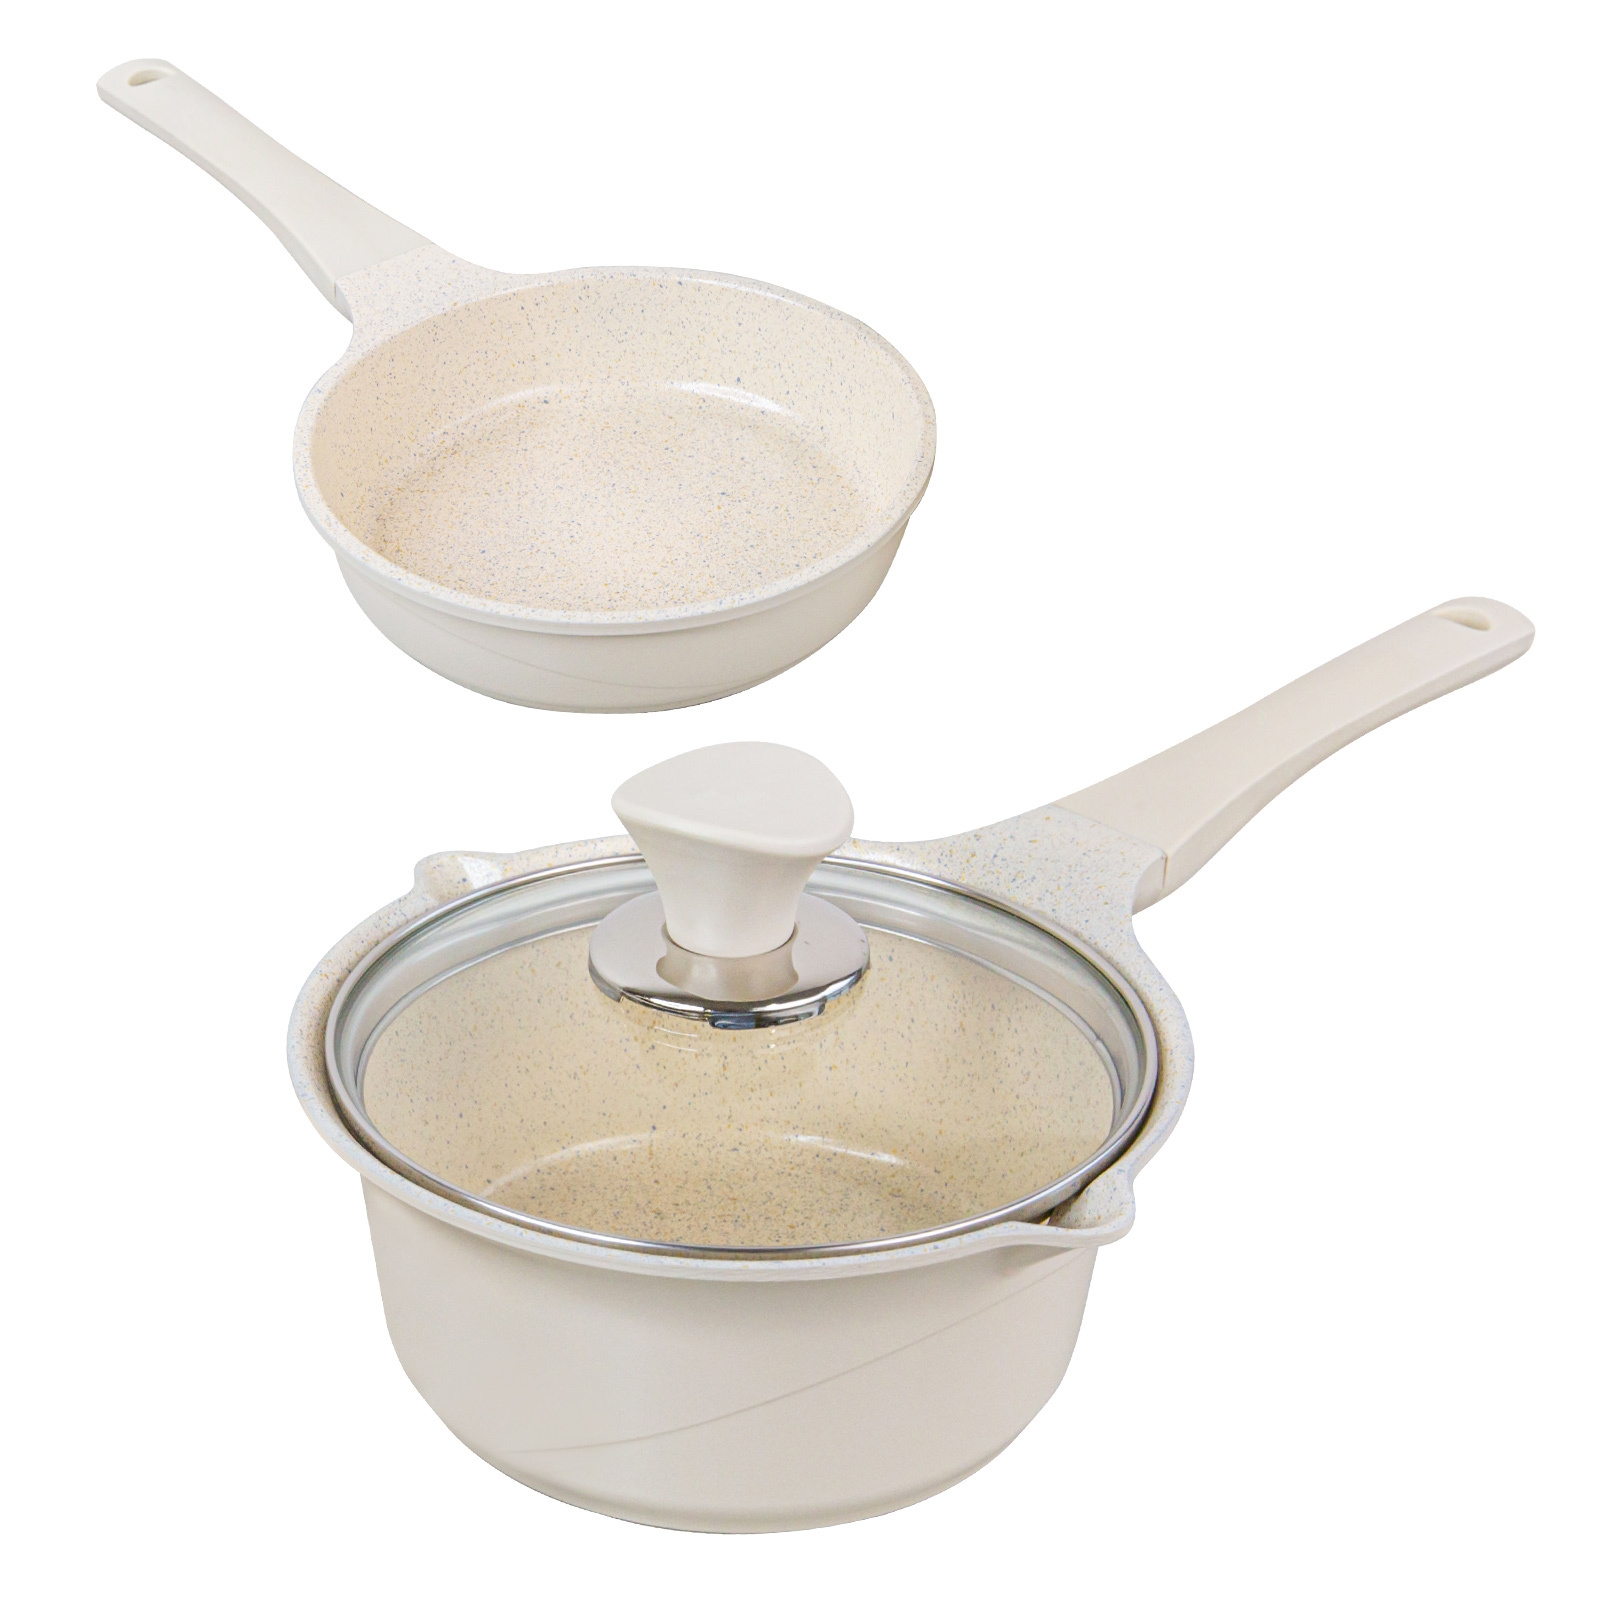 16cm Sauce Pot and Stone Frypan with a Lid - IVORY